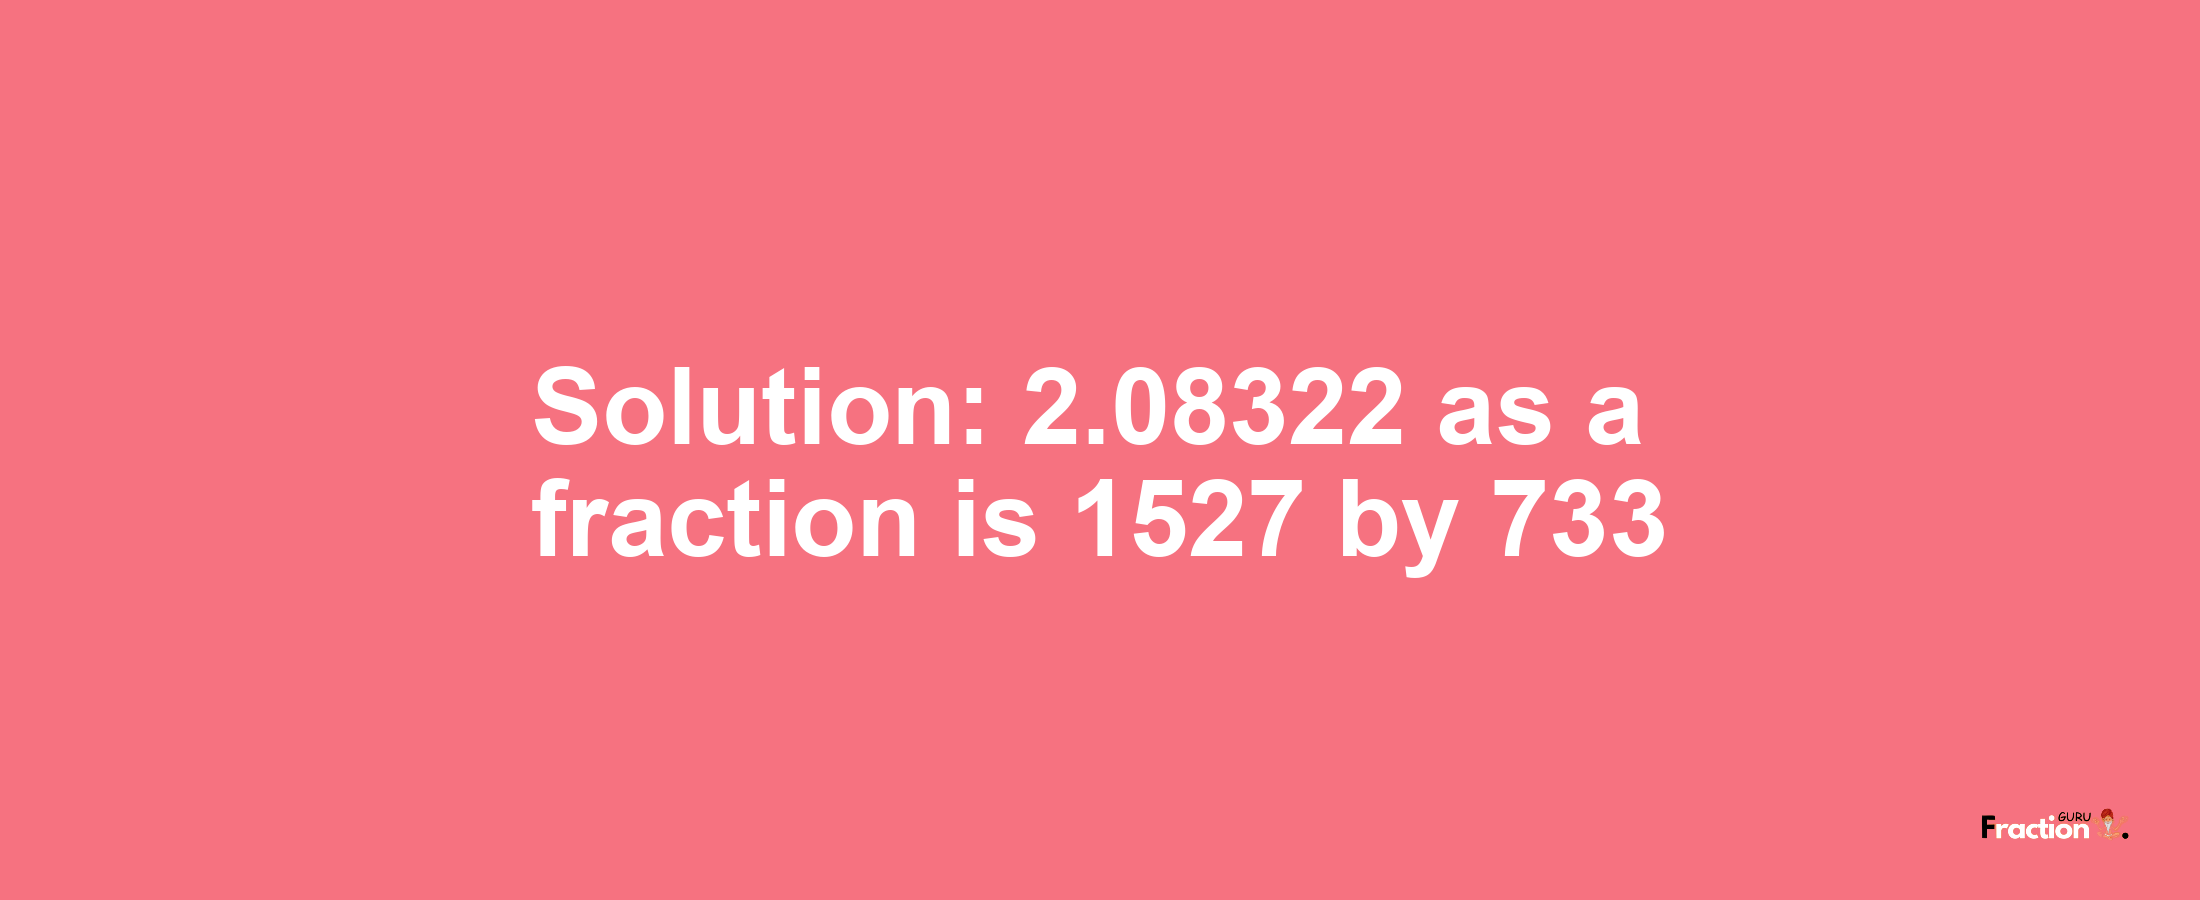 Solution:2.08322 as a fraction is 1527/733